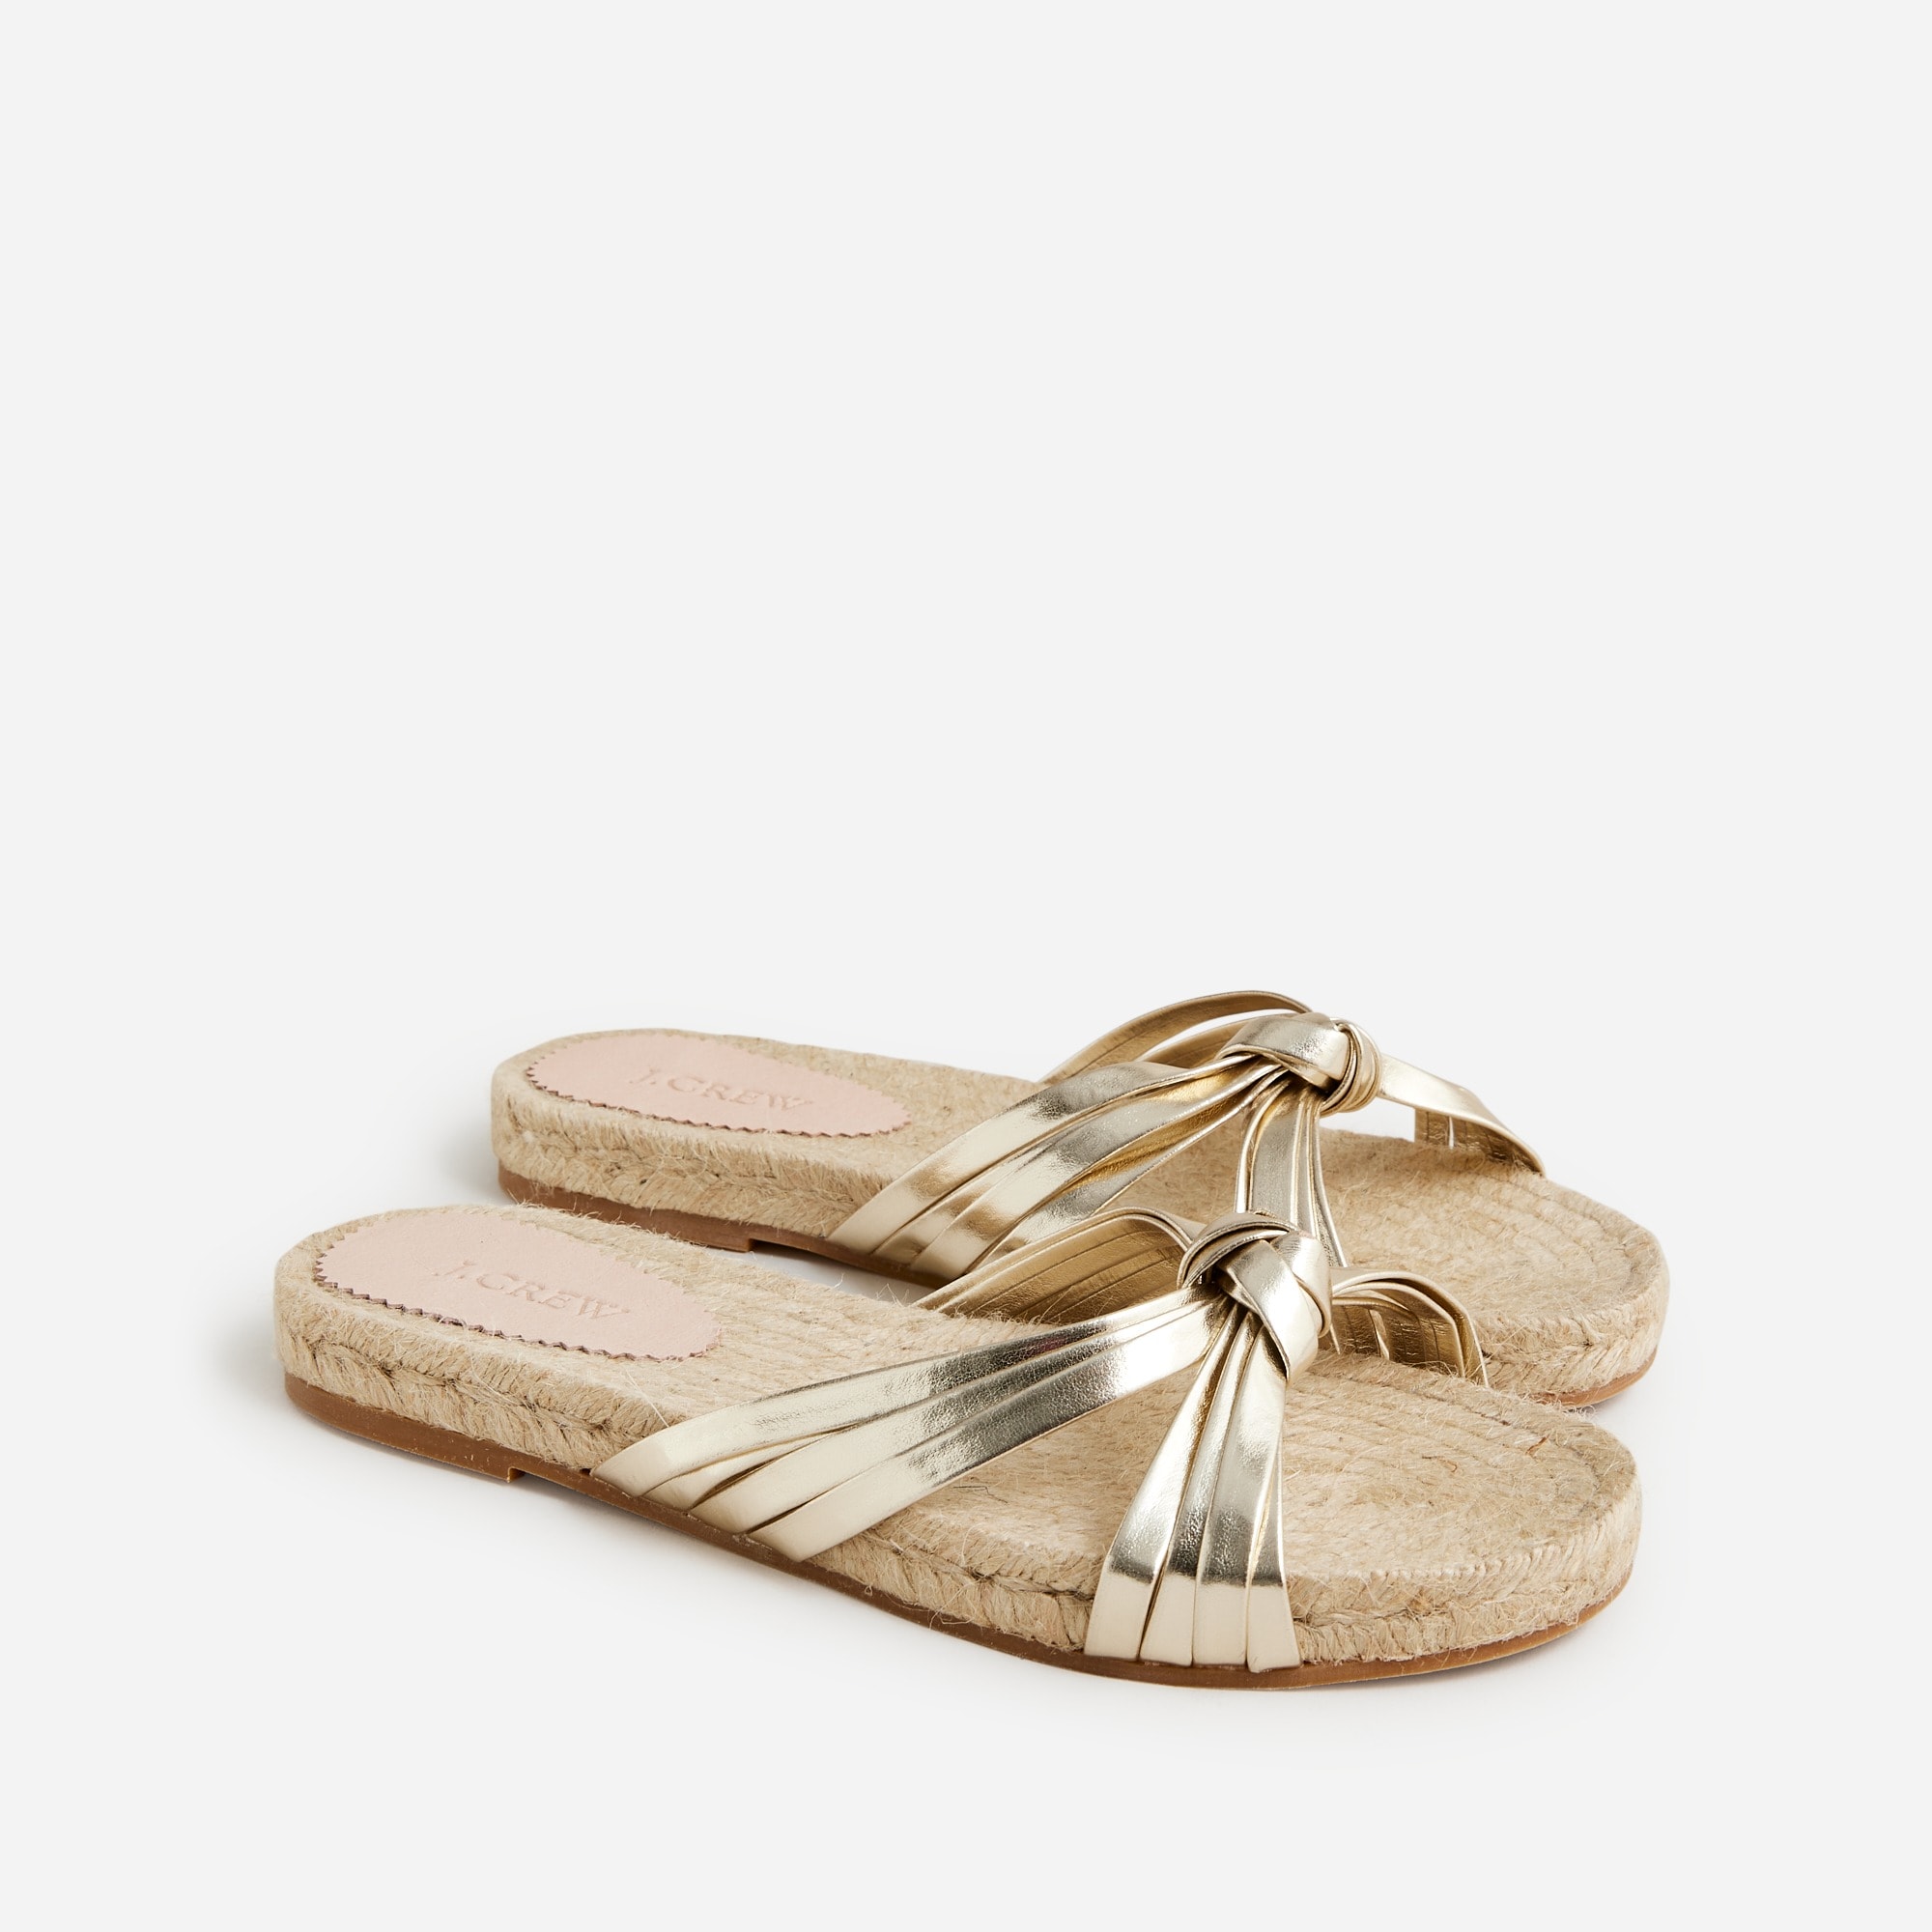  Made-in-Spain knotted espadrille slides in metallic leather